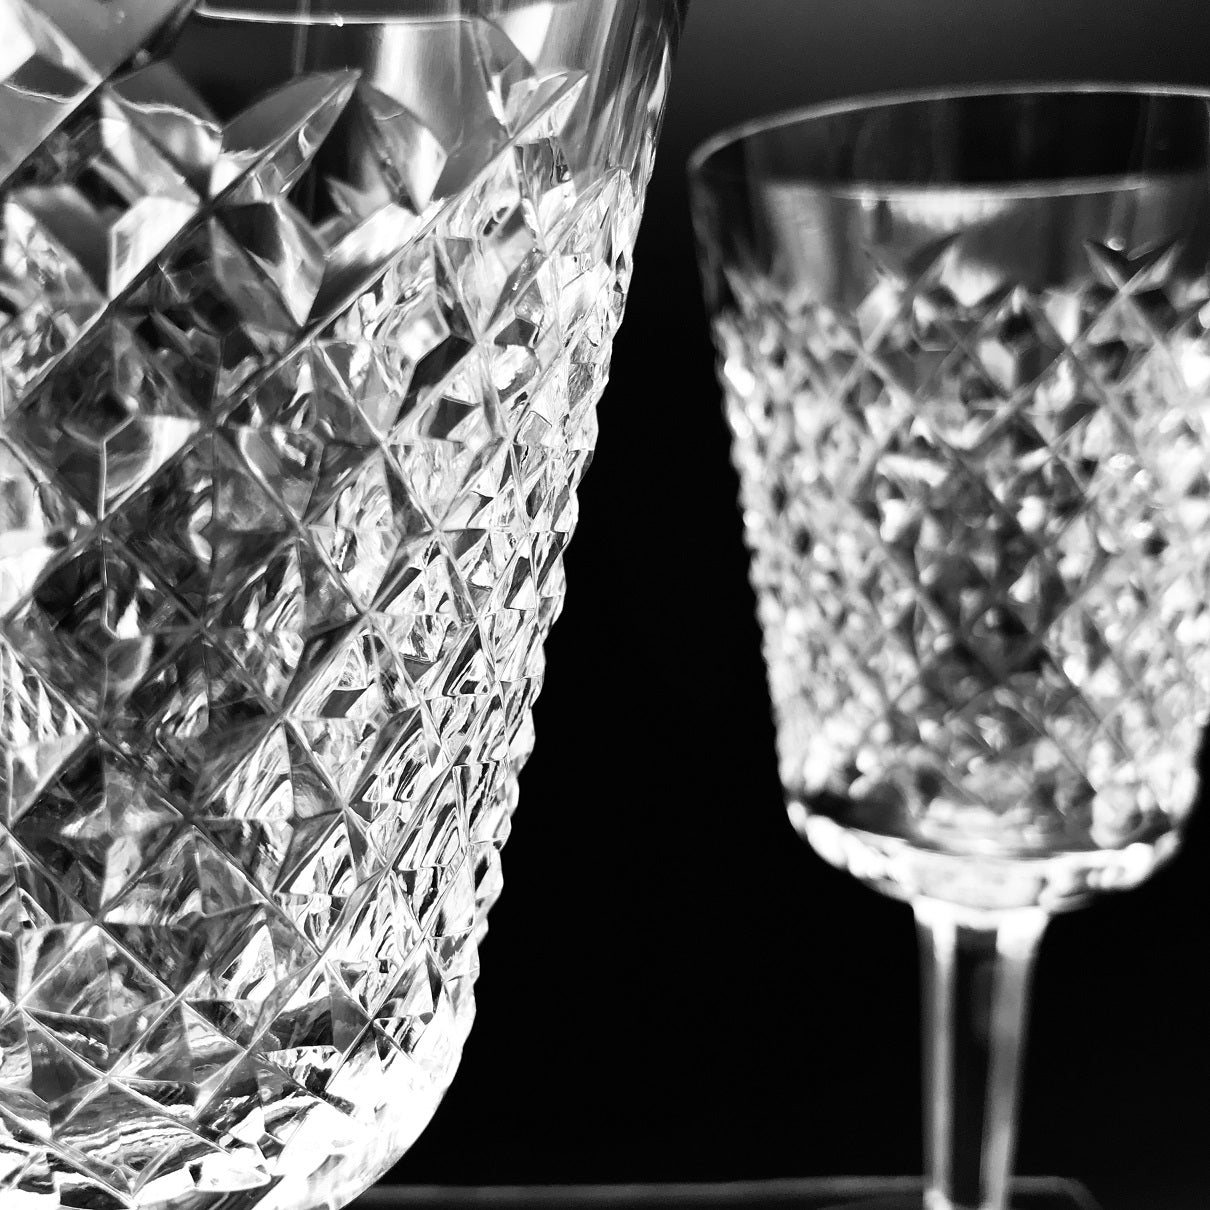 Waterford Crystal Alana Goblet Pair  Waterford Alana pattern is a stunning combination of brilliance and clarity. Elegant and versatile, the Alana Goblet can be used for serving wine, water or juices.